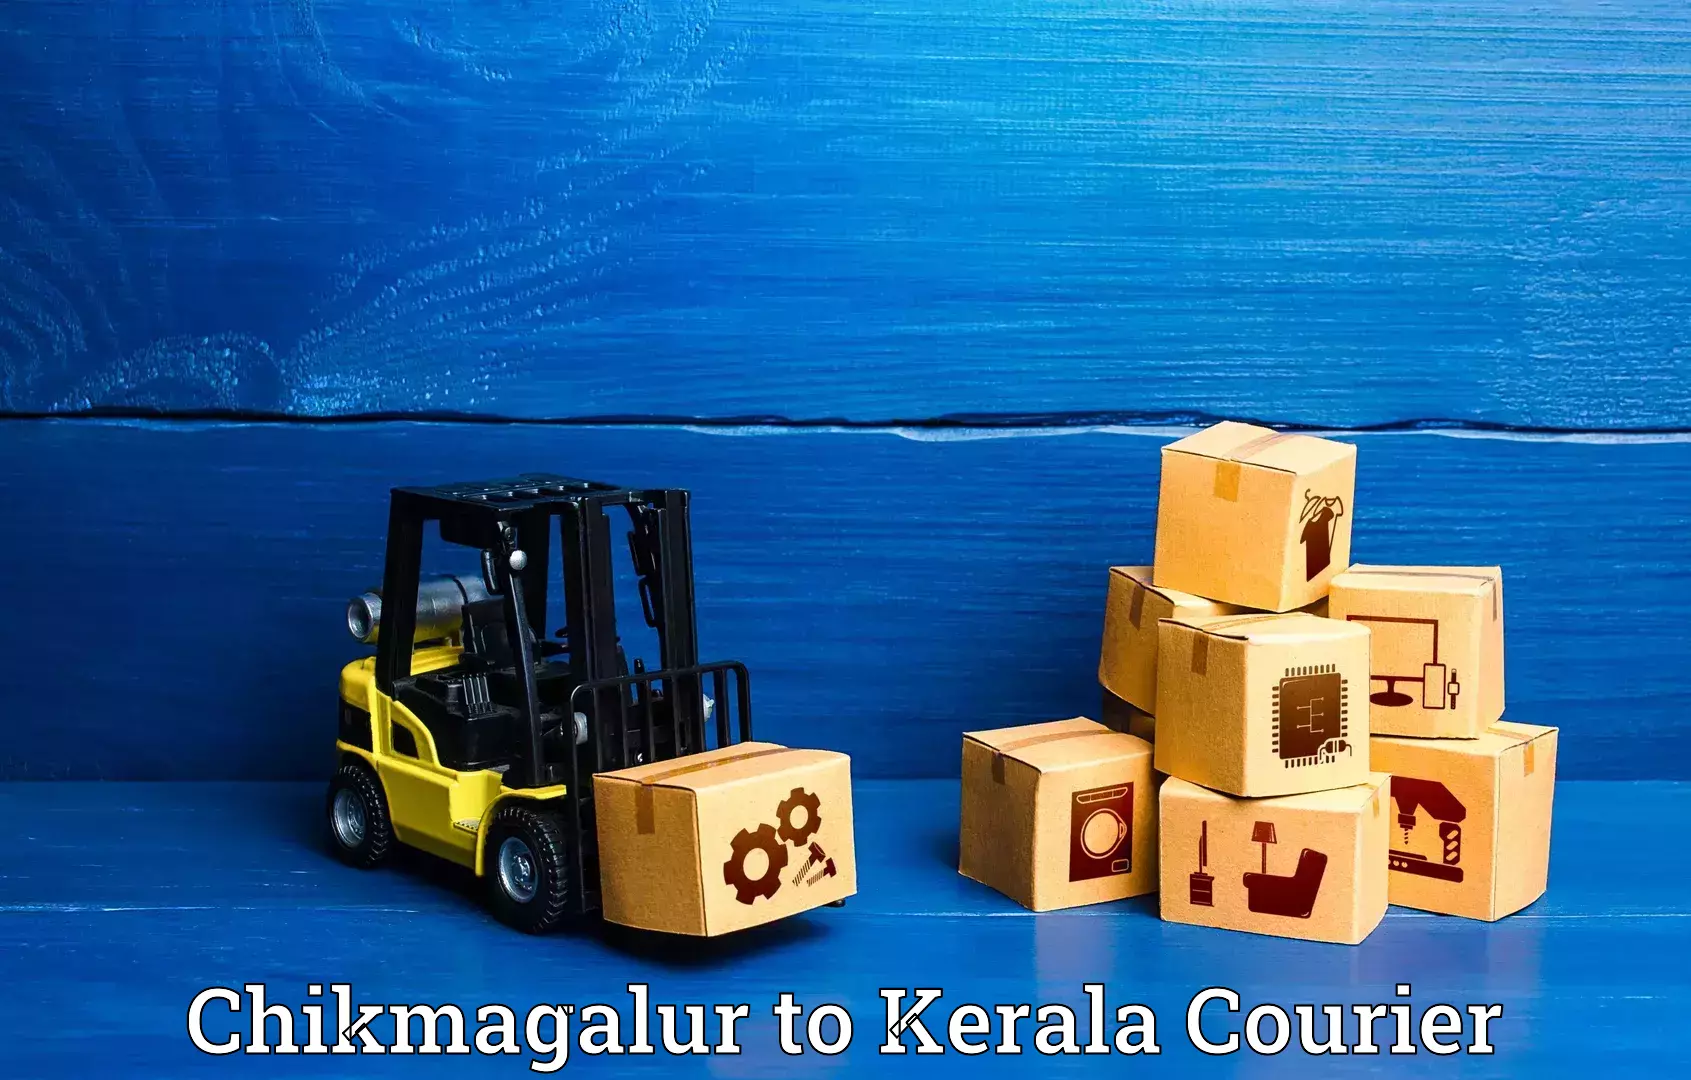 Luggage transport consultancy Chikmagalur to Parappa